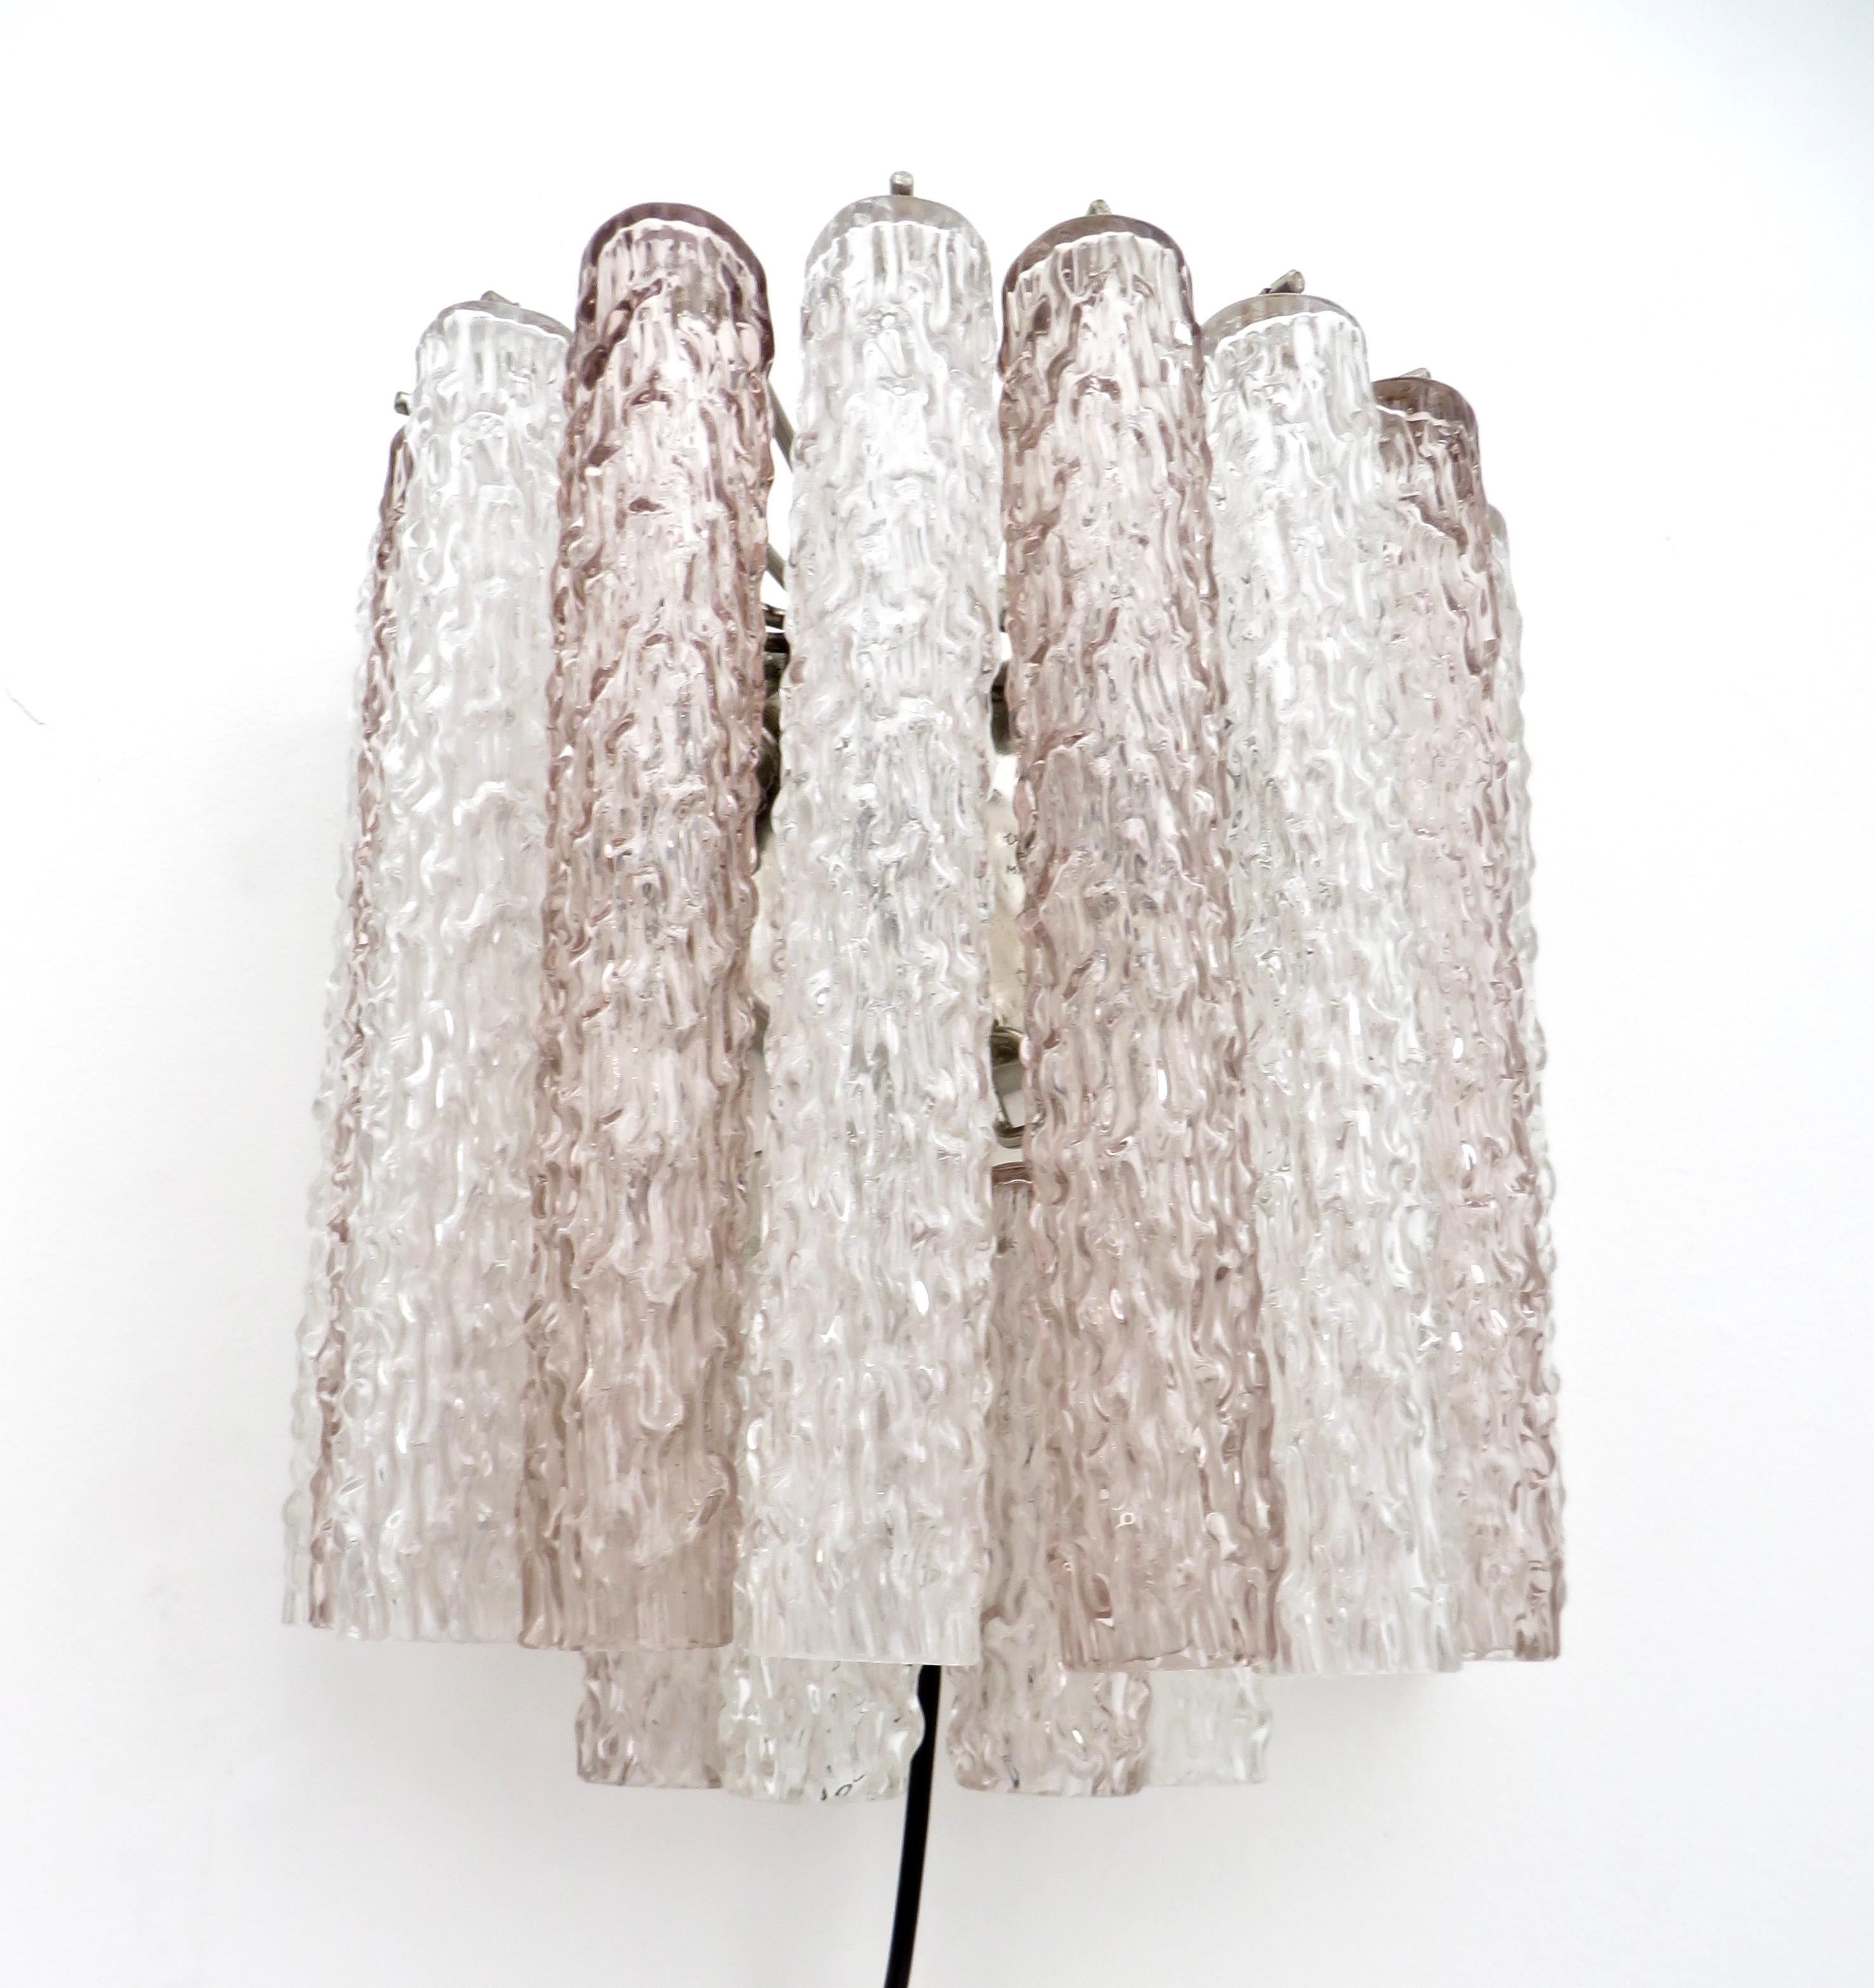 Italian Glass Pale Lavender Pink and Clear Tronchi Murano Sconces by Venini 1